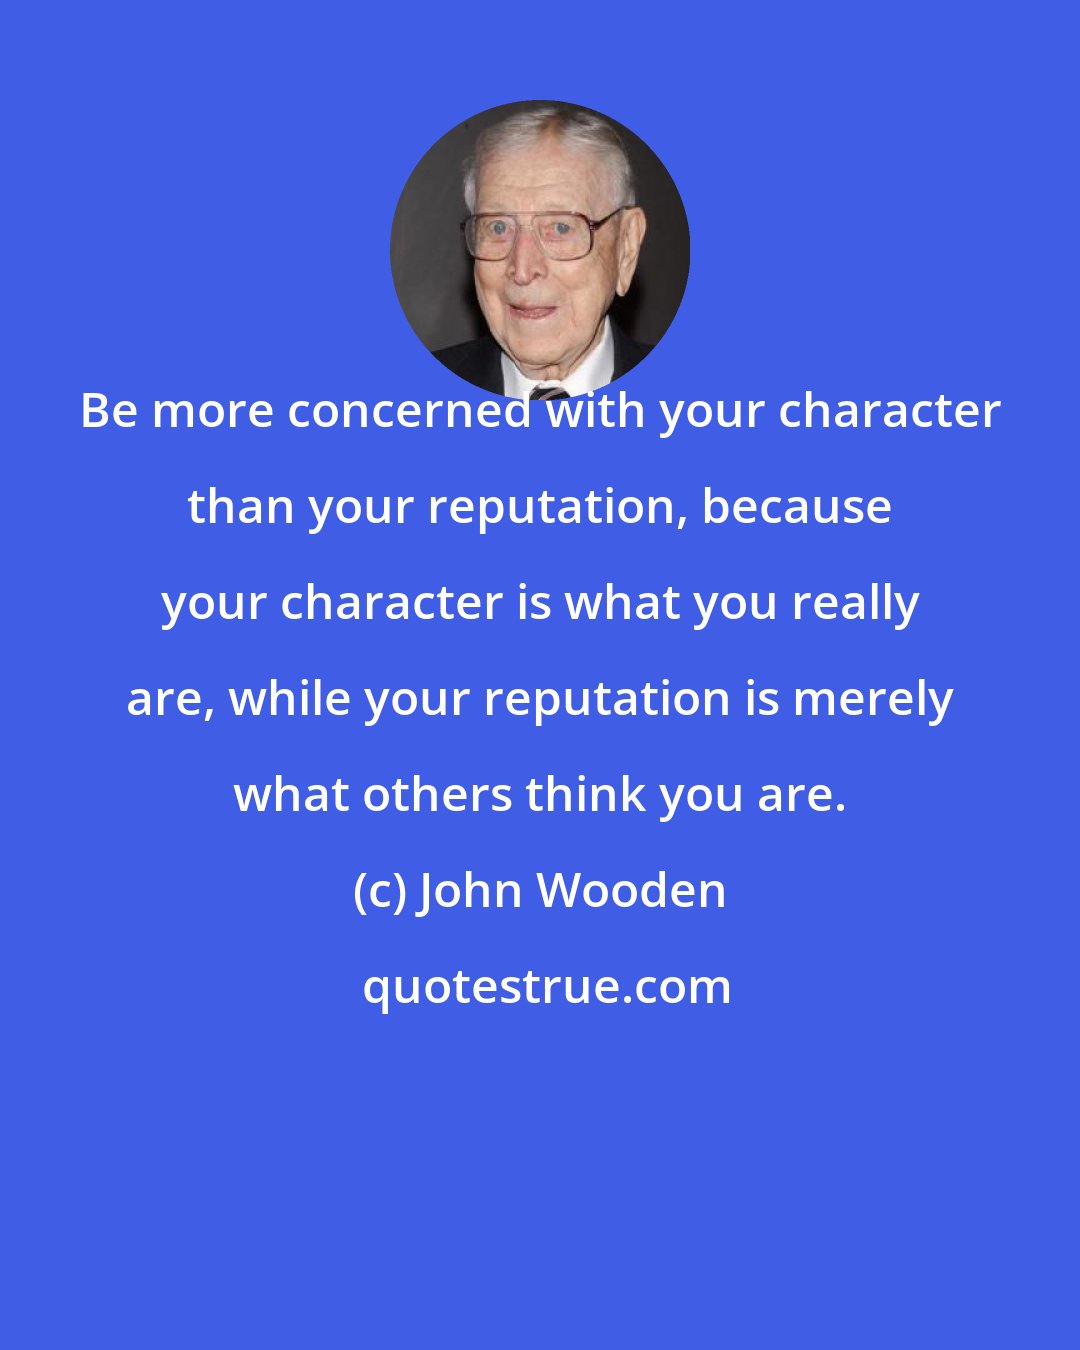 John Wooden: Be more concerned with your character than your reputation, because your character is what you really are, while your reputation is merely what others think you are.